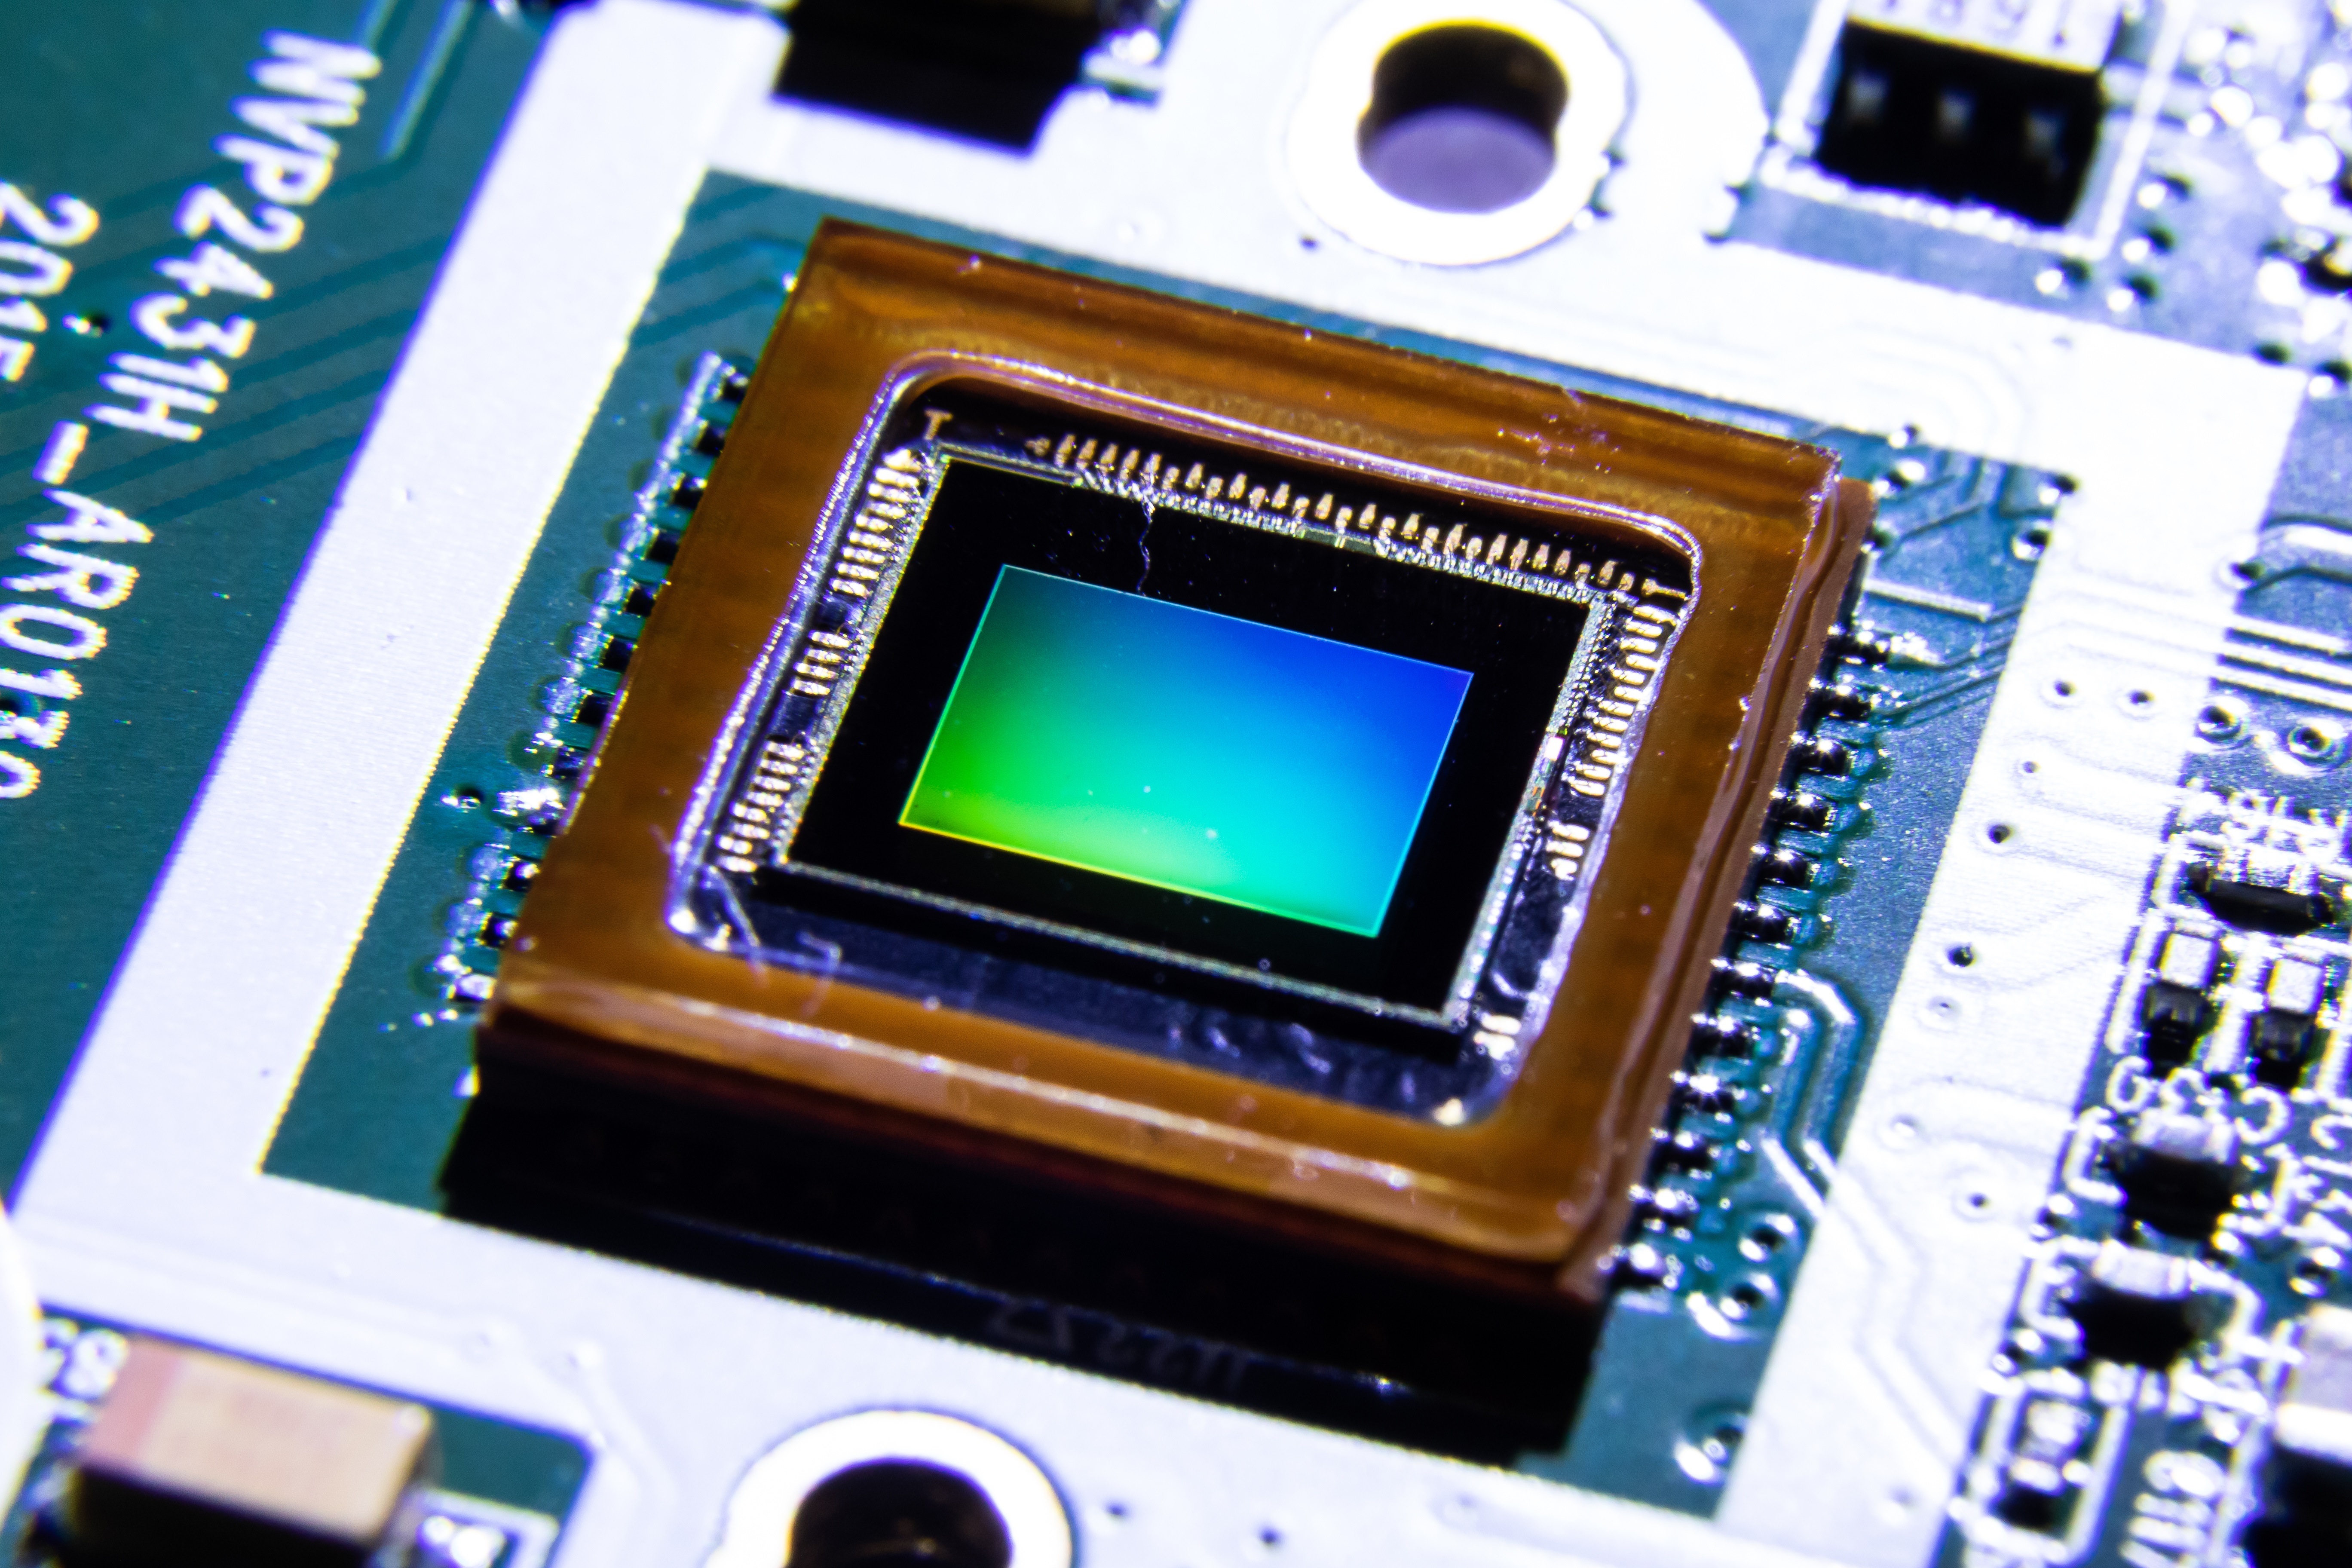 CMOS sensor on a PCB, which could complement embedded sensors enabled by 3D printing